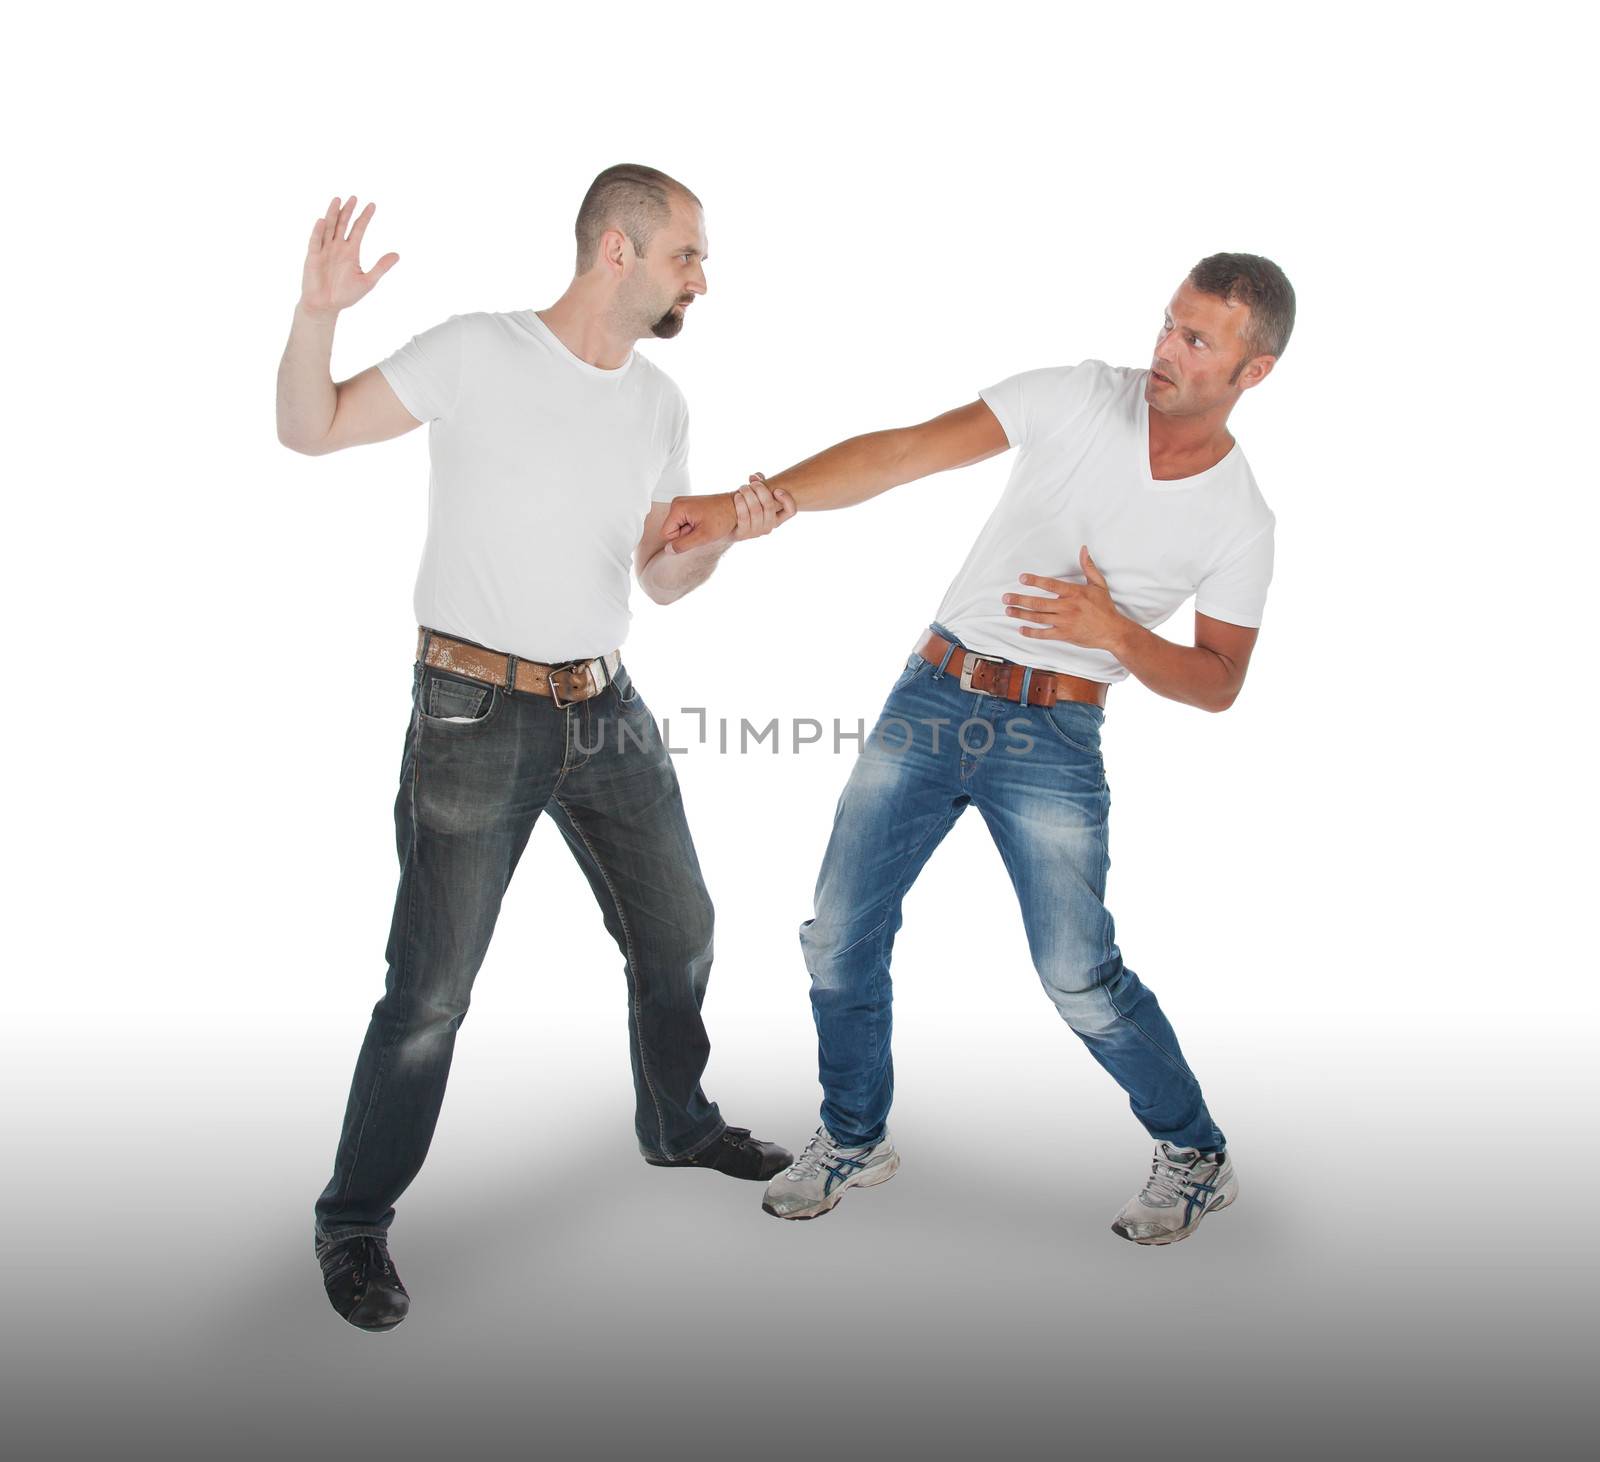 Man attacking other man, isolated on white